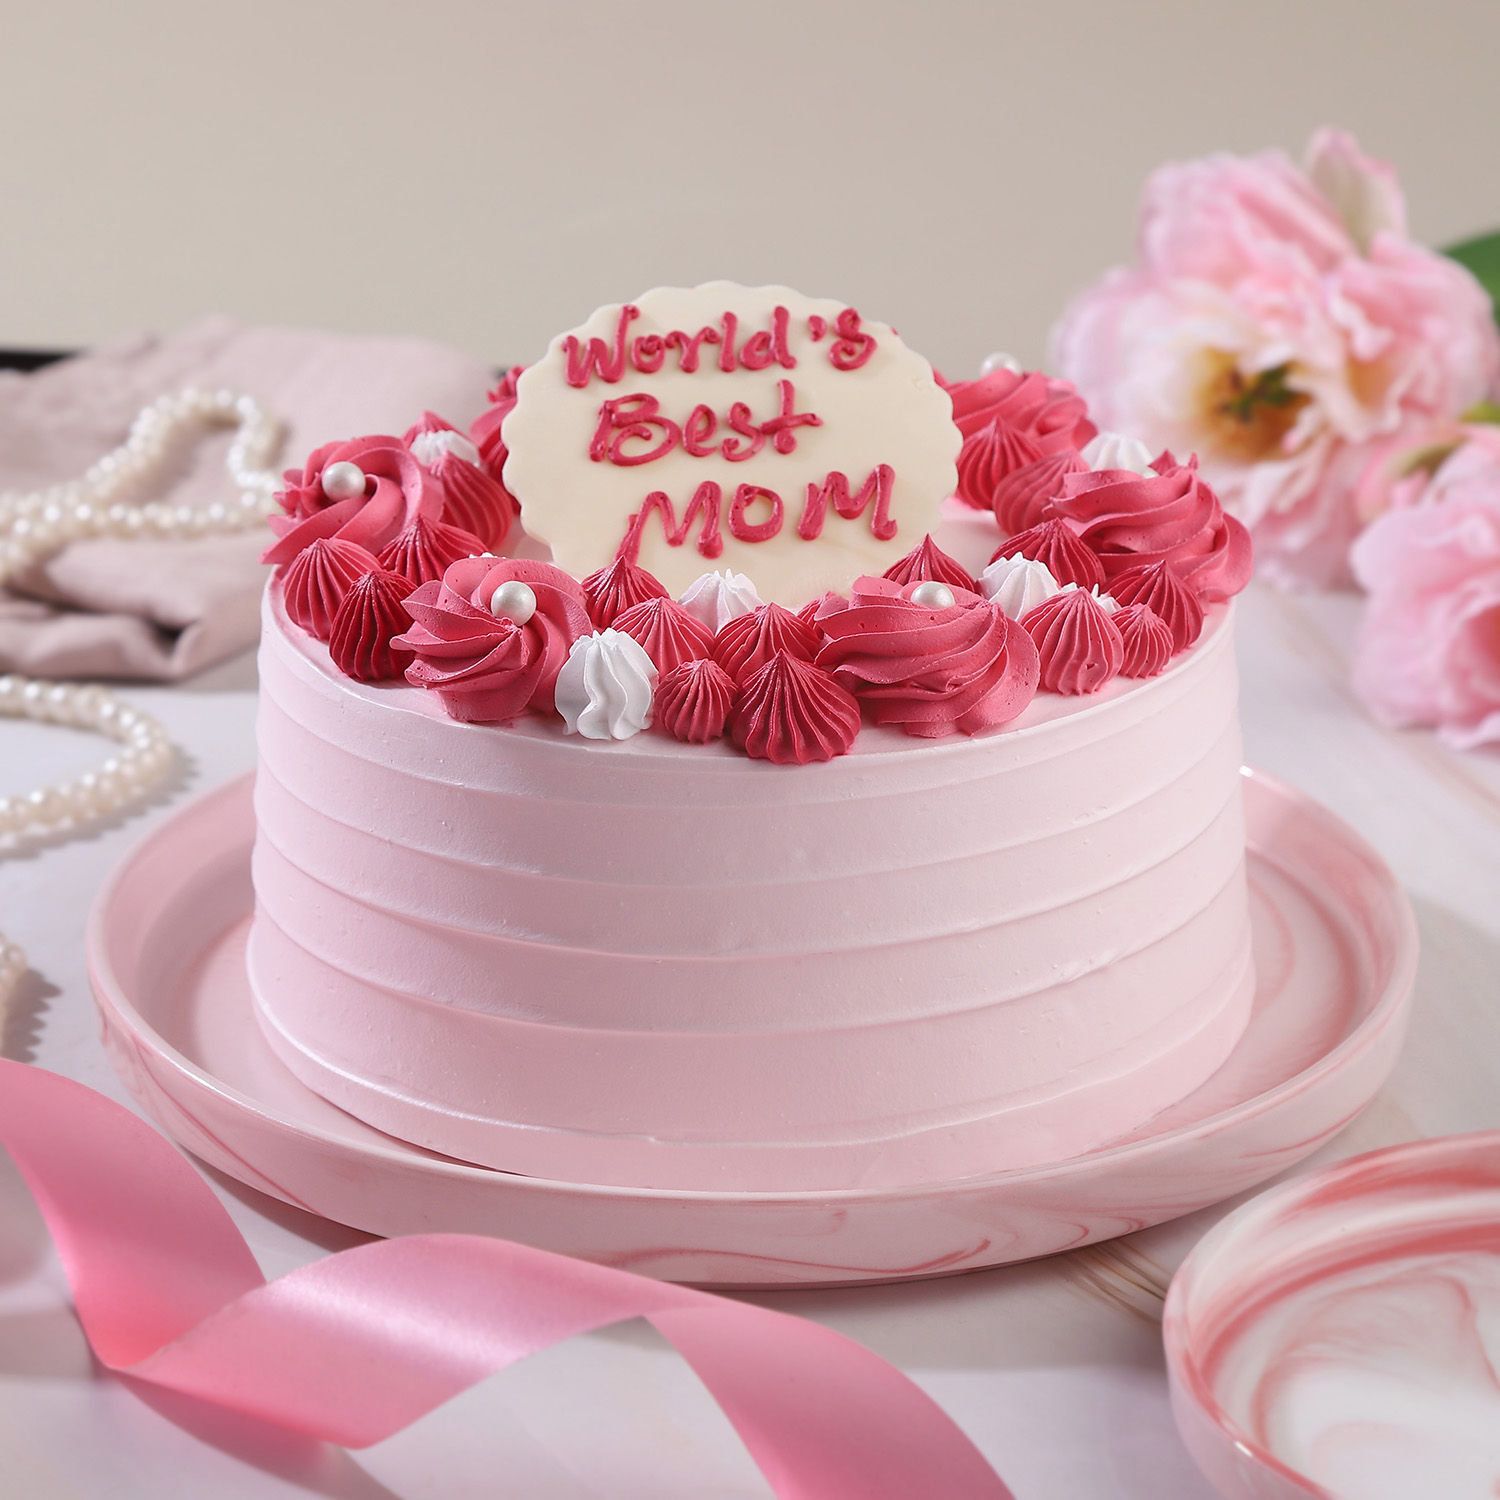 Leony 75 For Mothers Cake, A Customize For Mothers cake